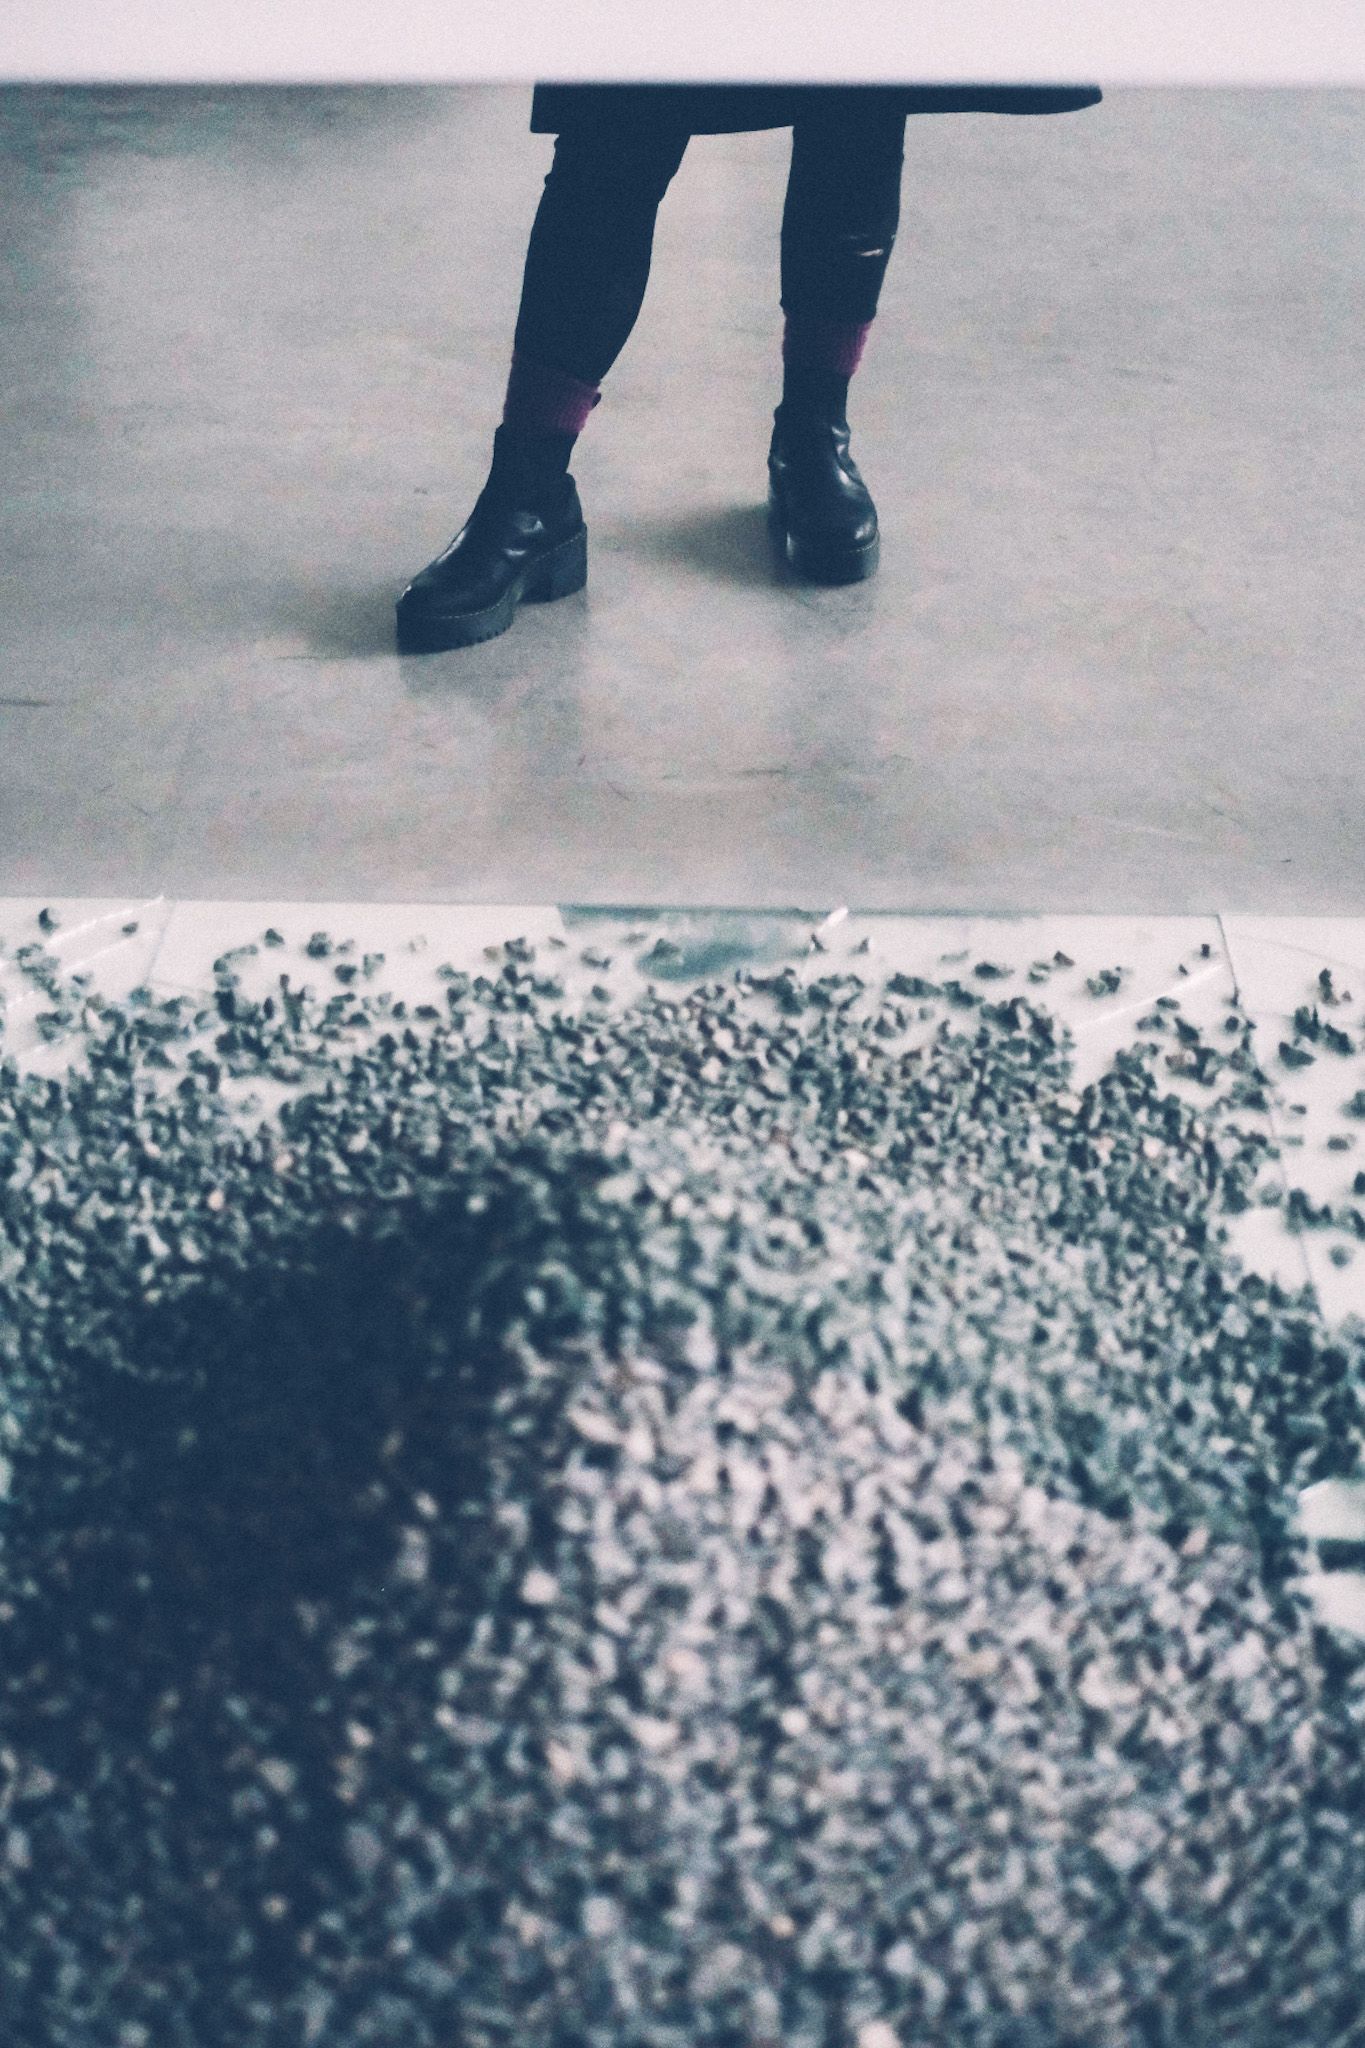 A pair of legs in black boots and tights are reflected in a mirror, standing on polished cement, above apile of gray rocks also reflected in the same mirror.